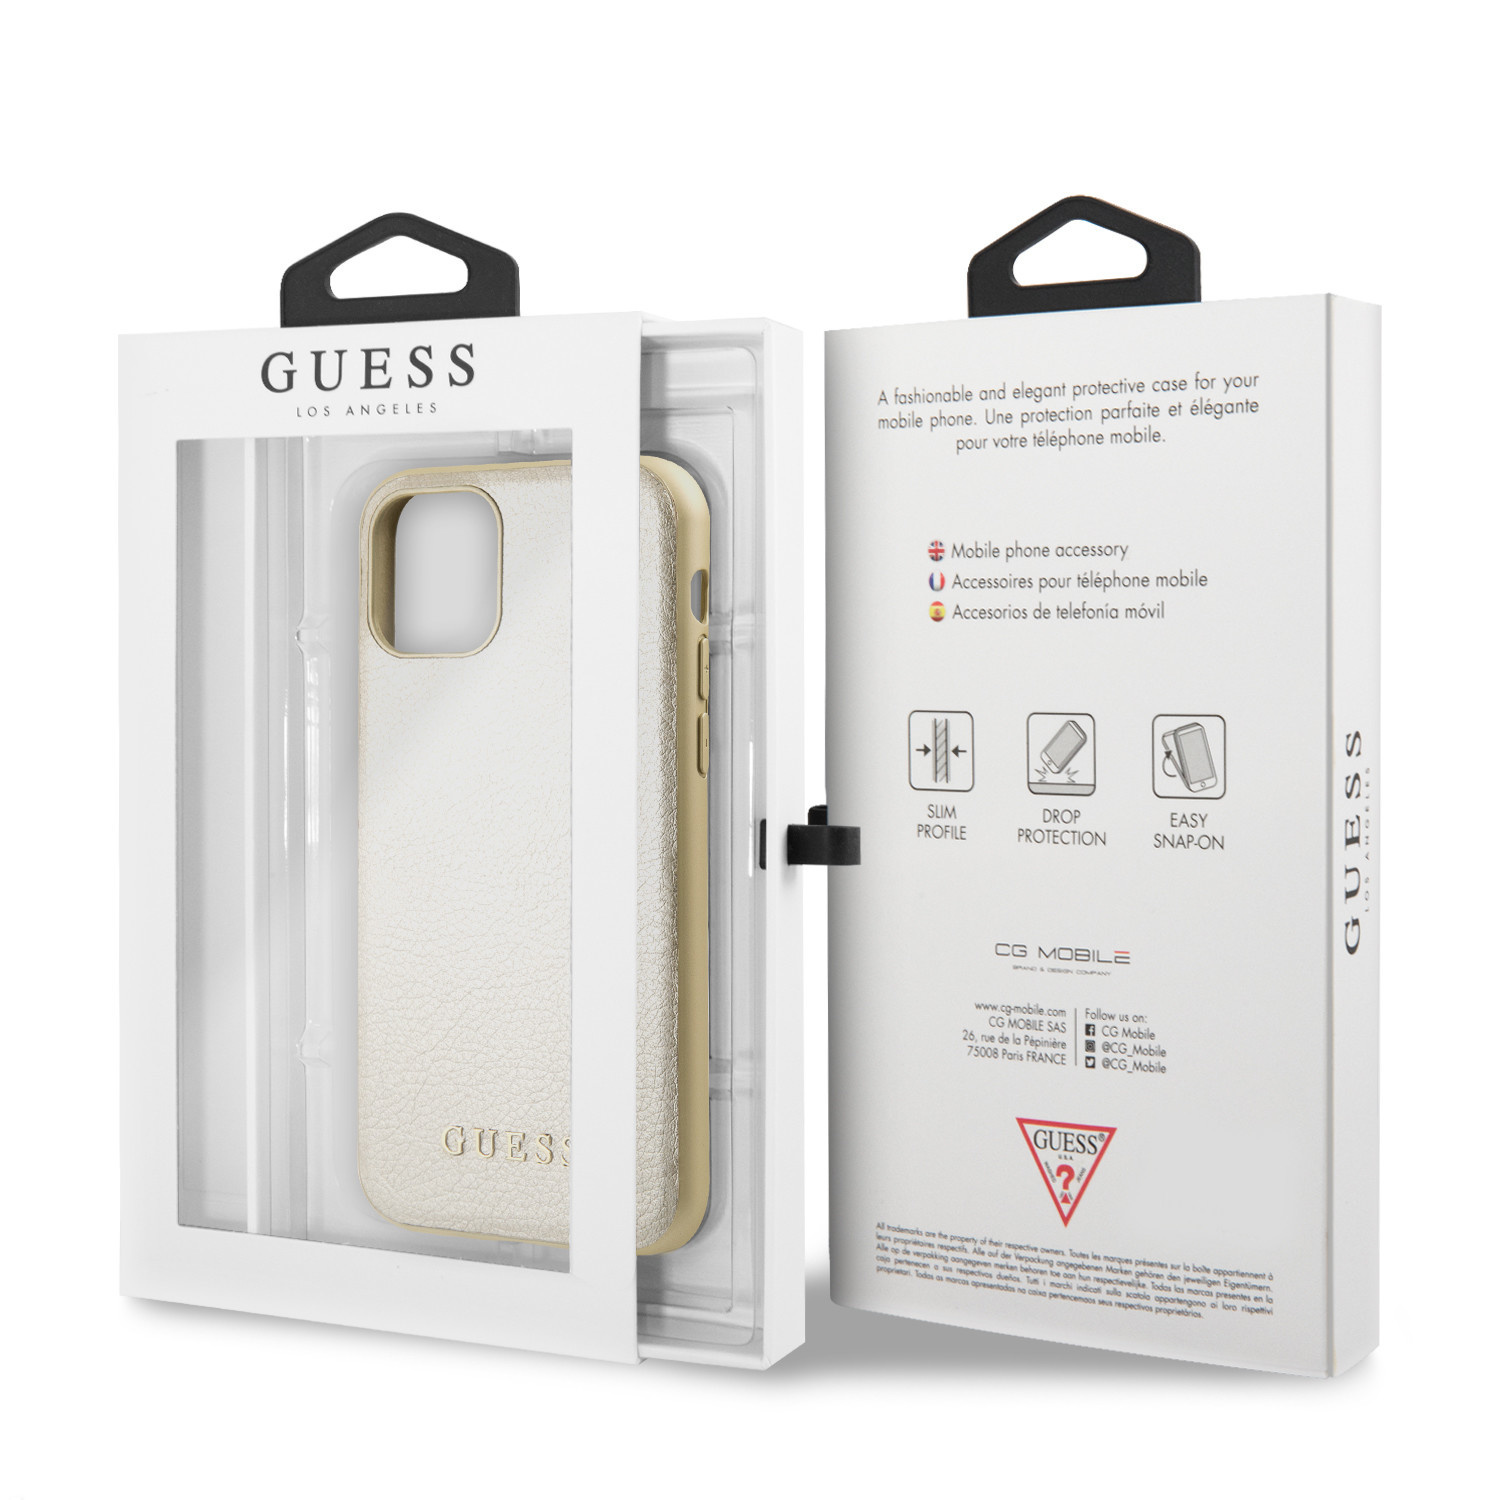 Ga wandelen marmeren straal Guess - backcover hoes - iPhone 11 Pro - Goud | CasualCases